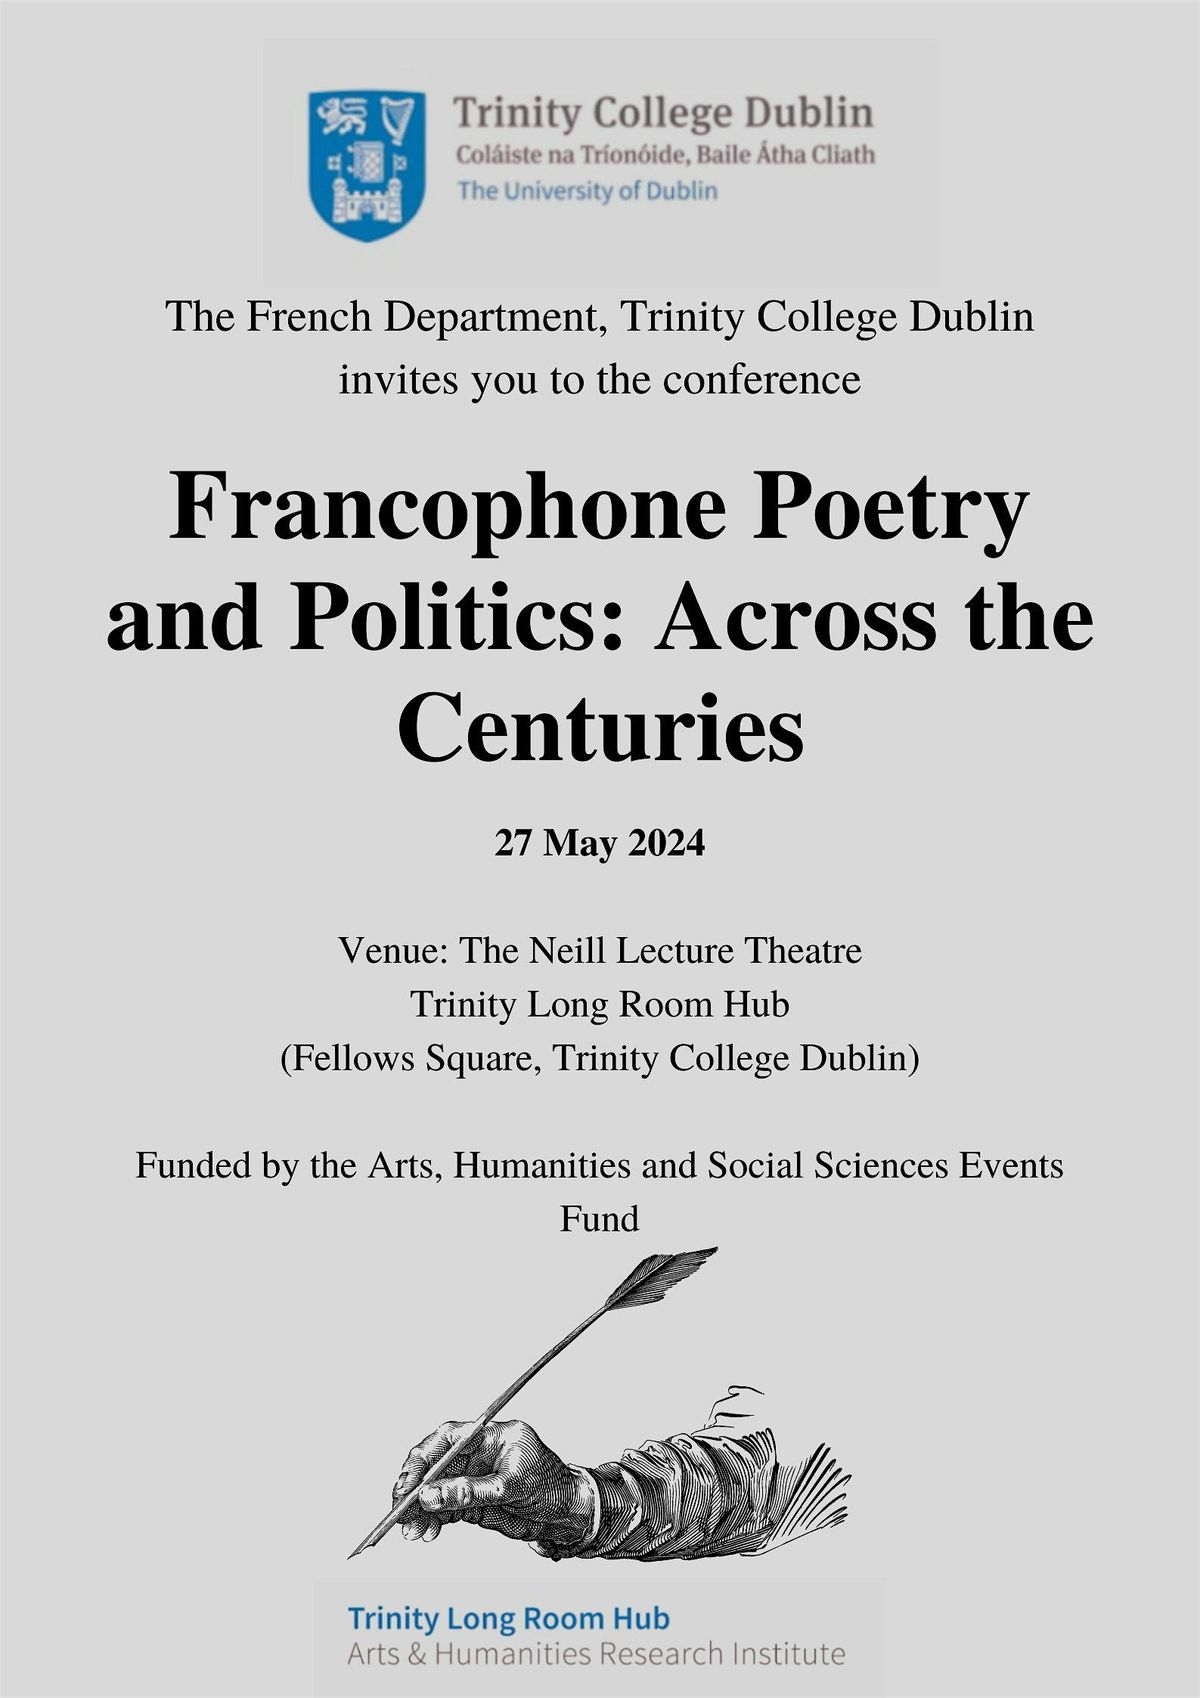 Francophone Poetry & Politics Conference, Trinity College Dublin, 27 May